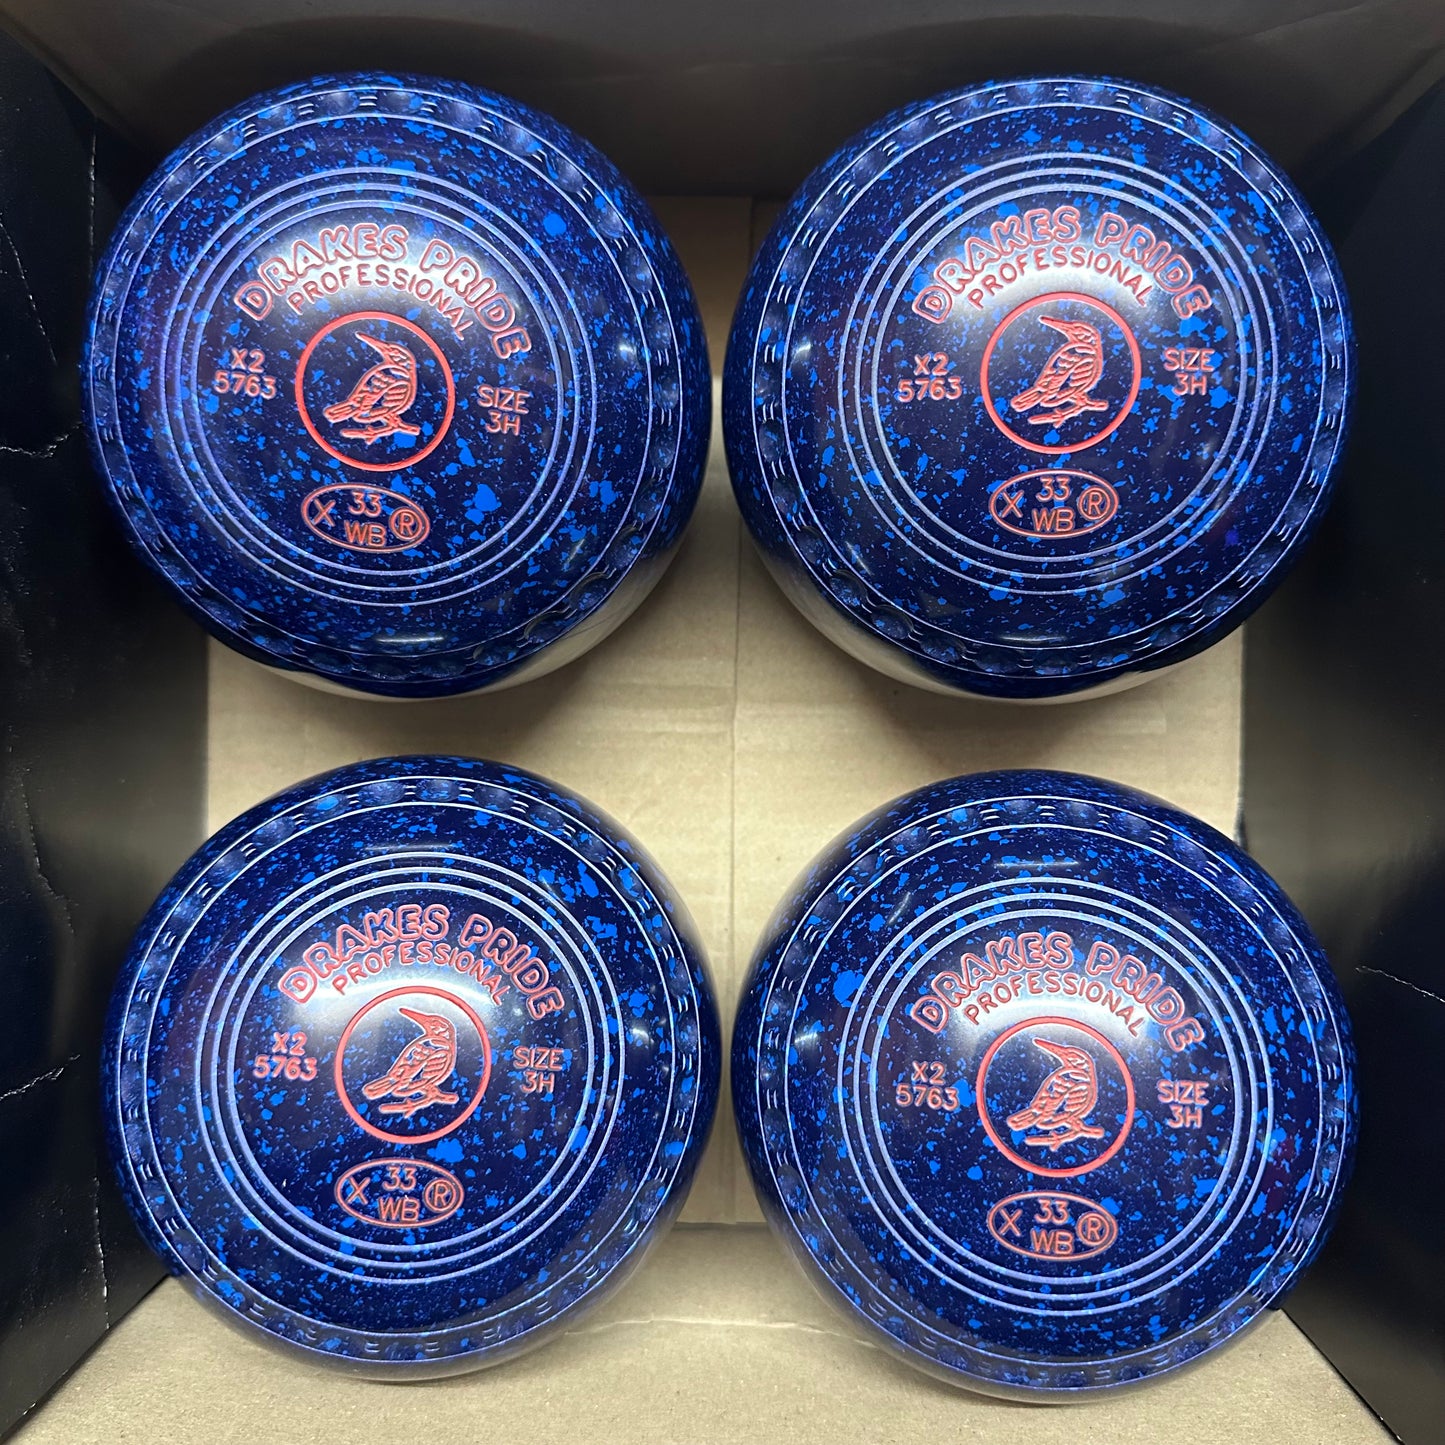 Drakes Pride Professional - Size 3H - Dark Blue/Blue (Red Rings) - WB33 Stamp